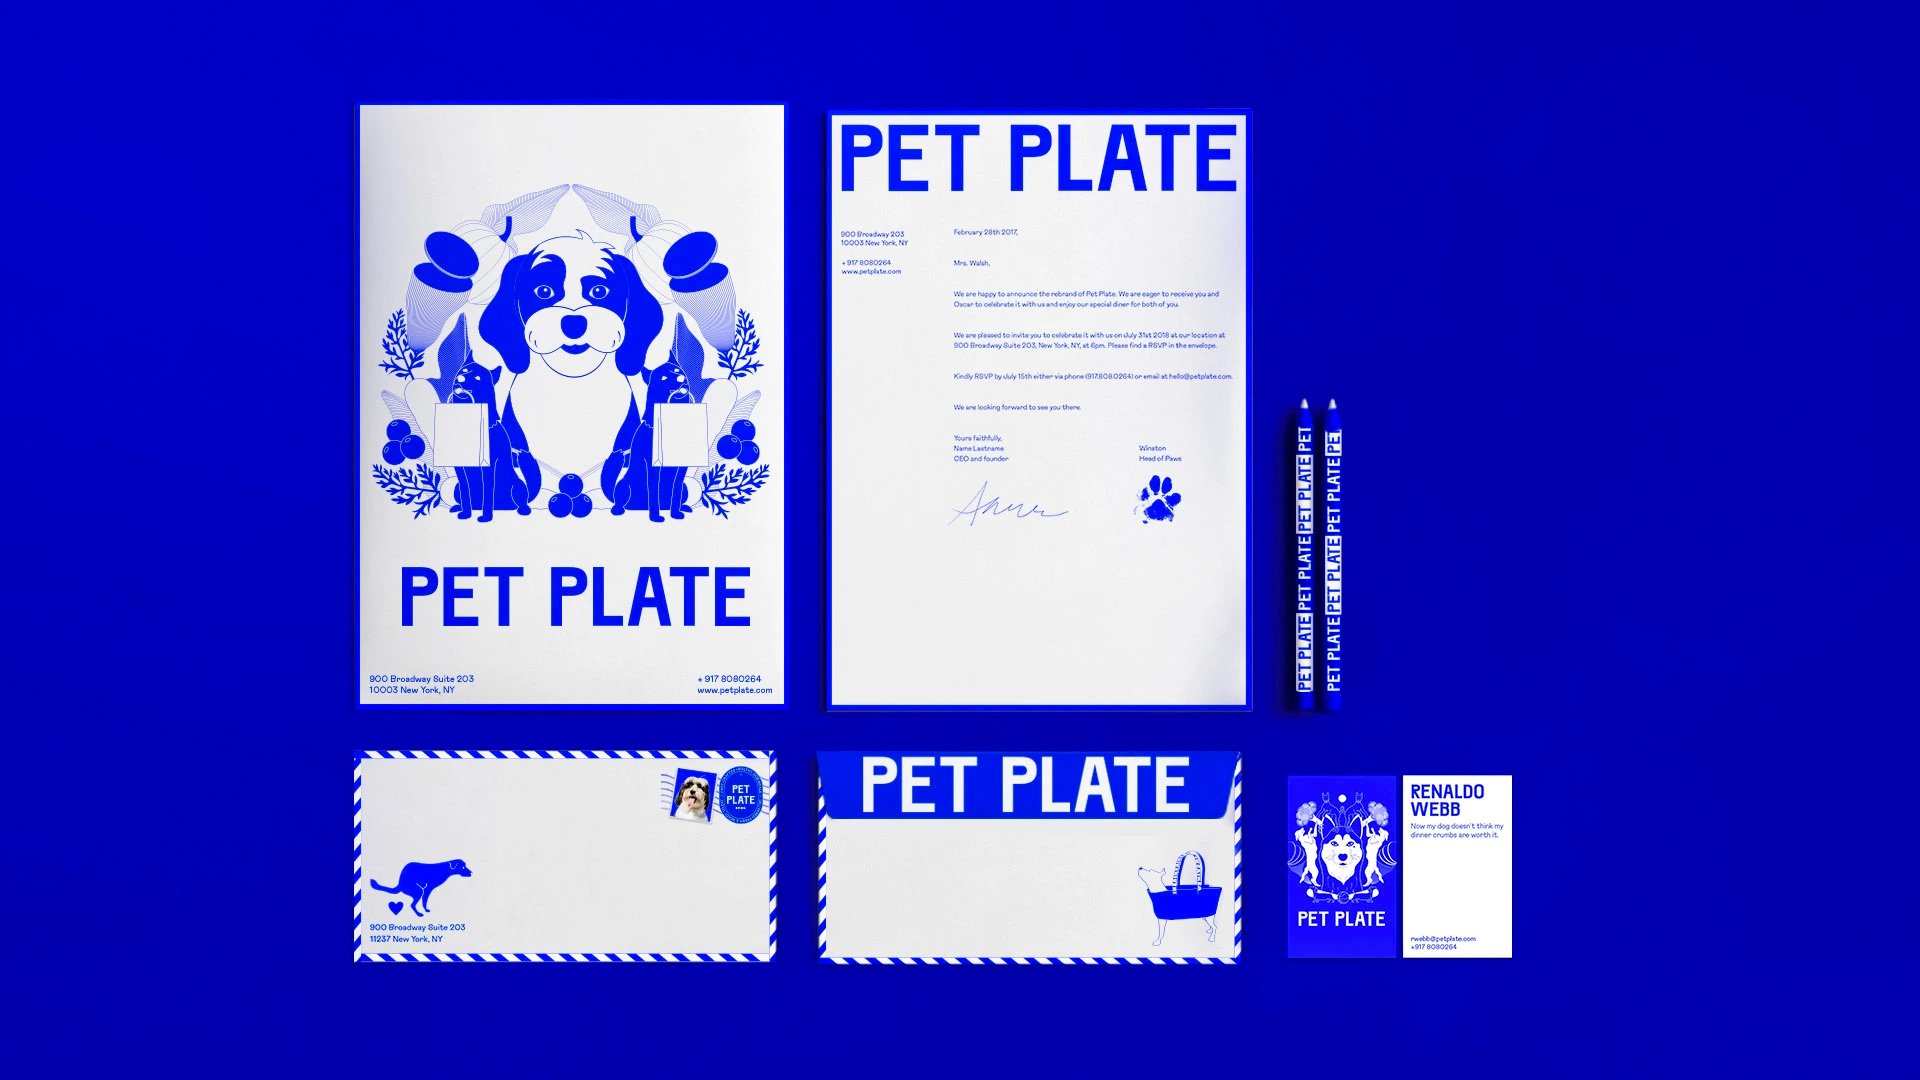 New Logo and Identity for Pet Plate by Sagmeister & Walsh and In-house